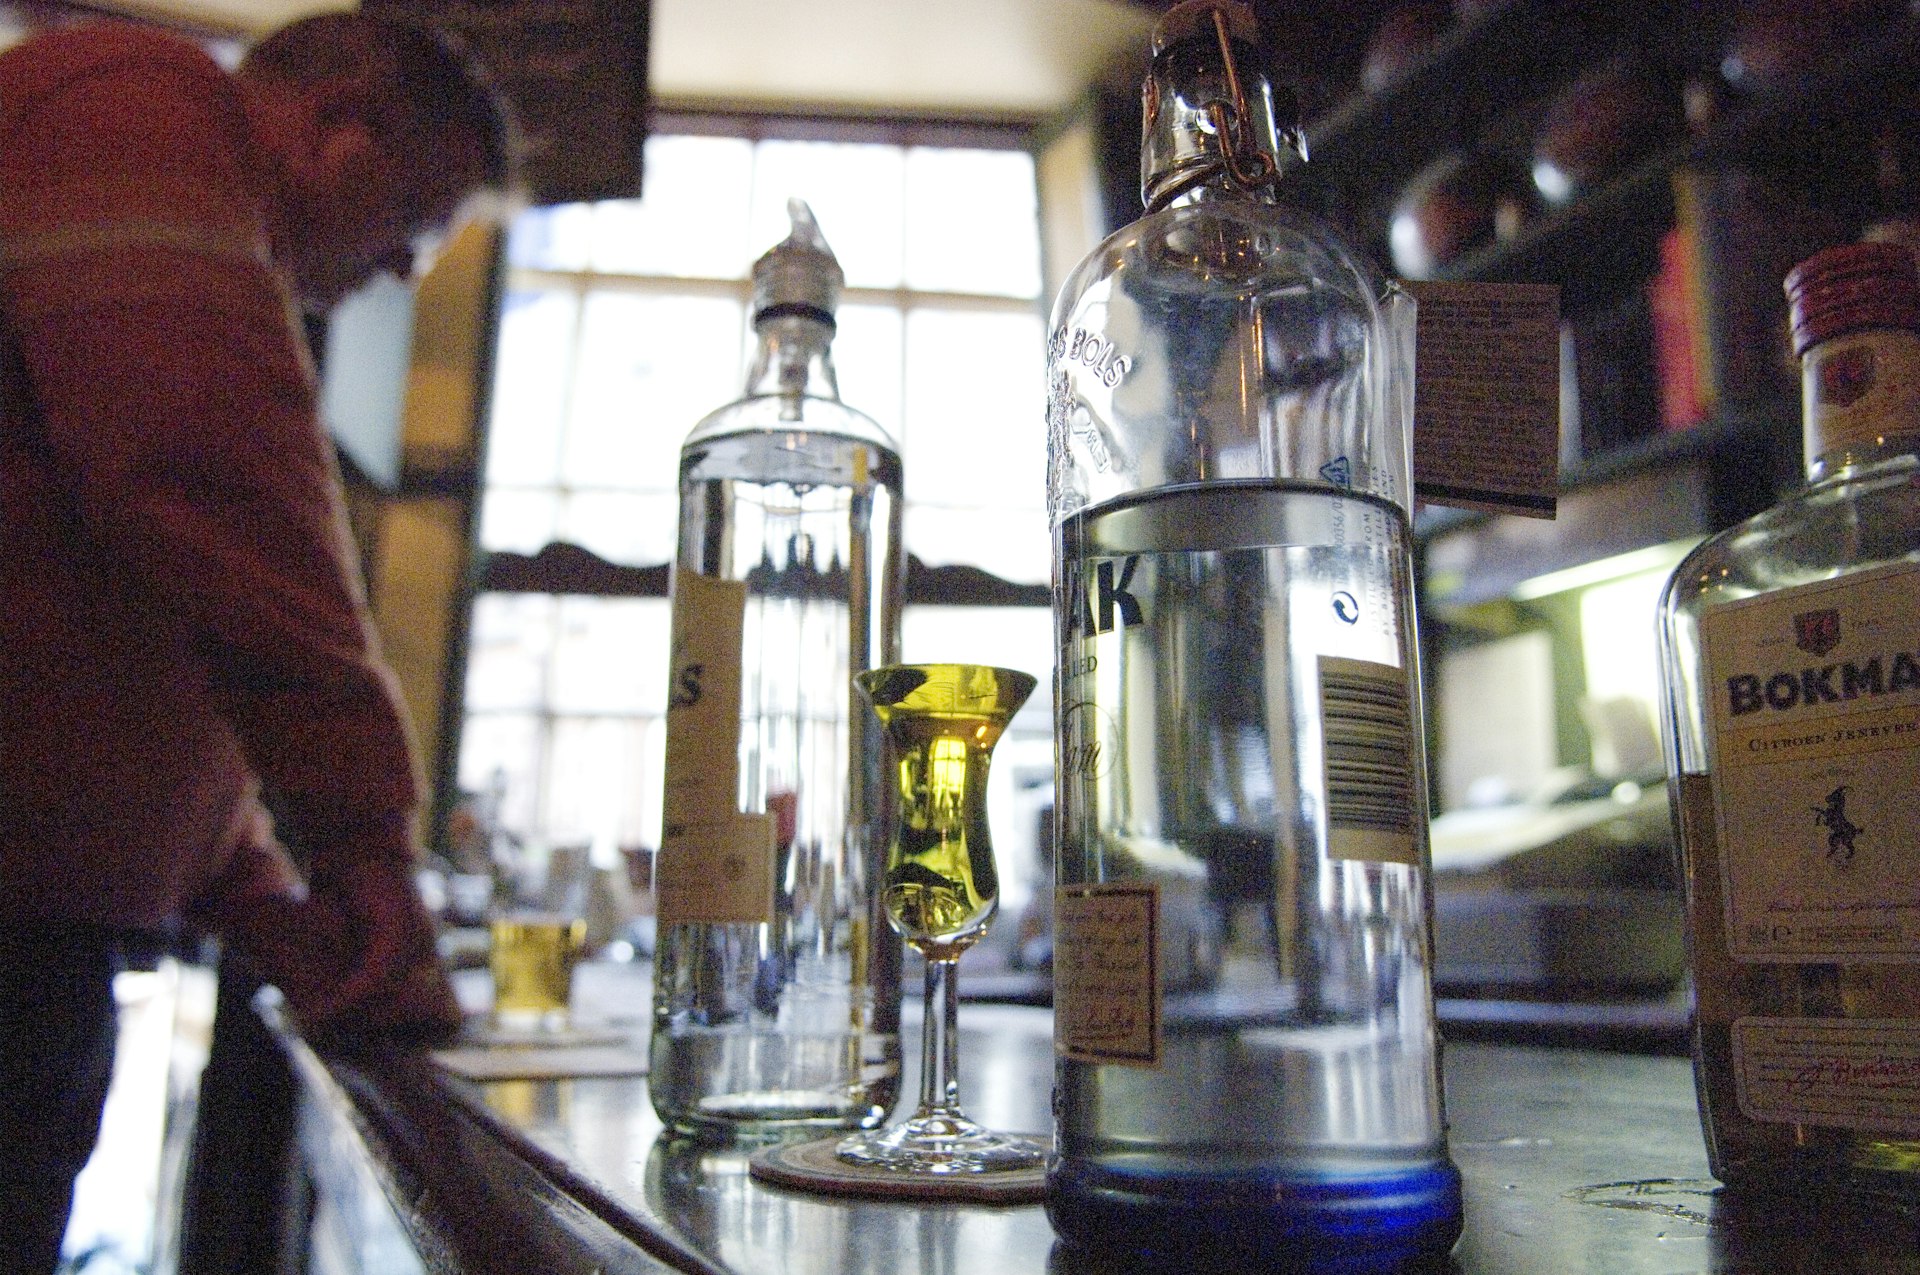 Bottles of Dutch gin and a glass of yellow gin pictures on the bar at De Drie Fleschjes